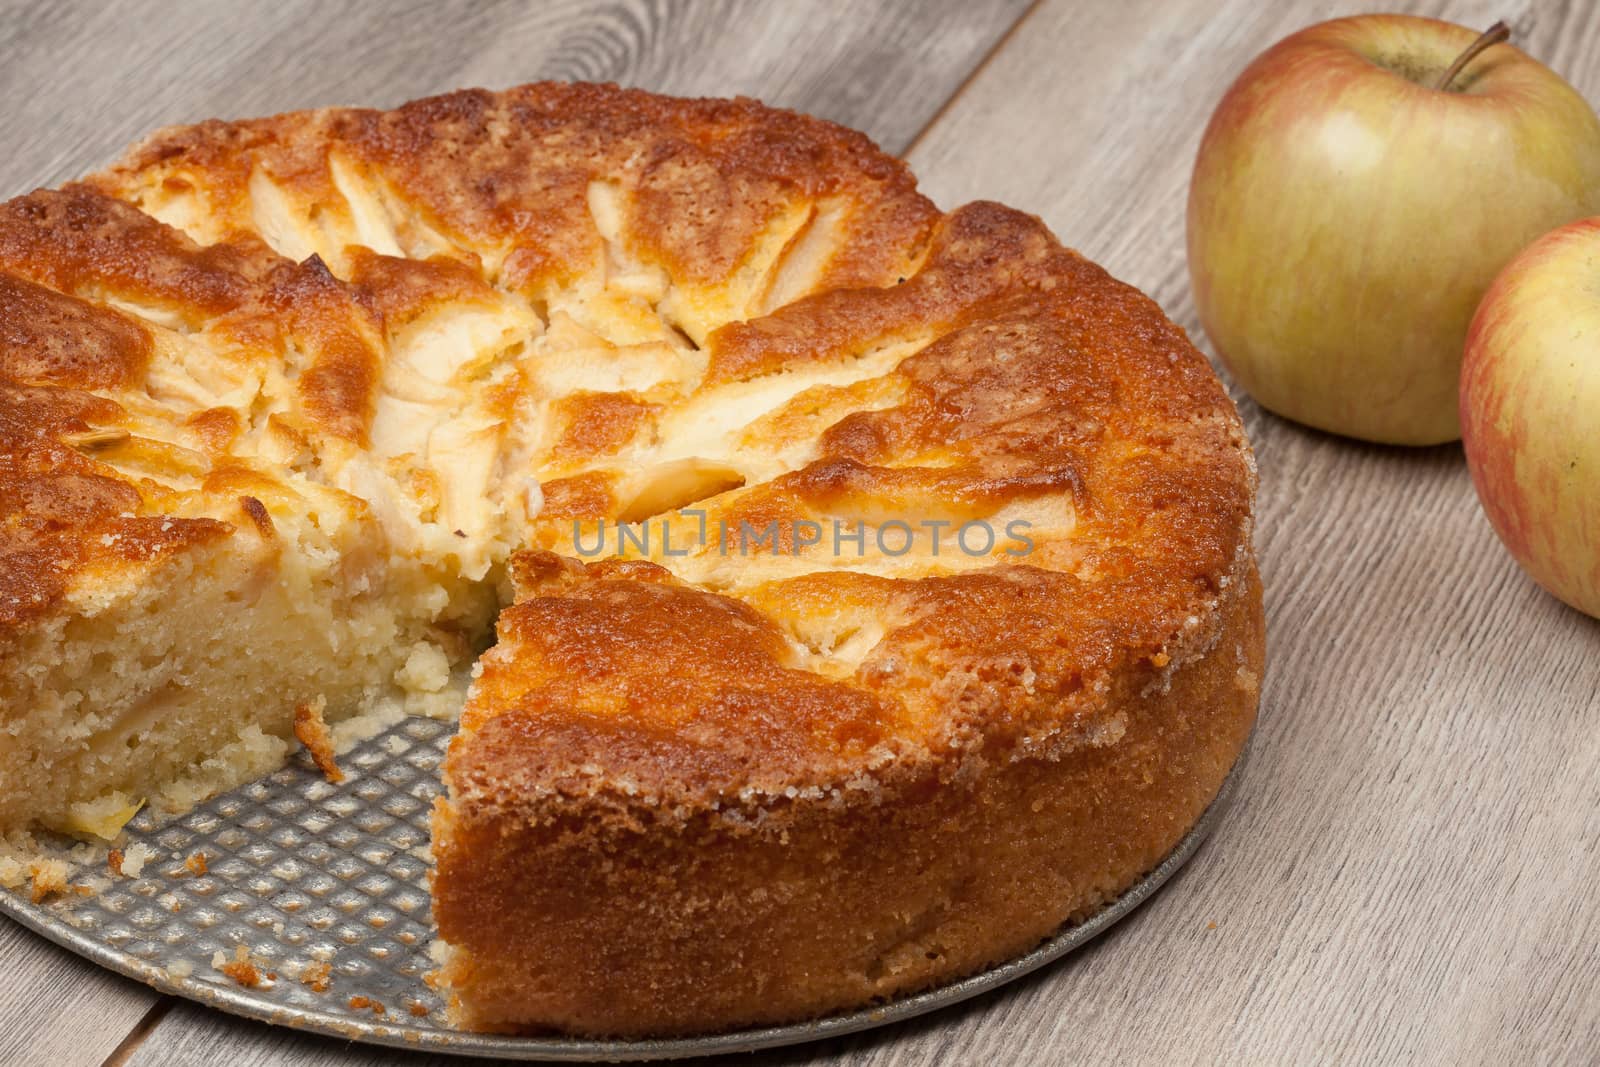 Apple cake by mmproduct